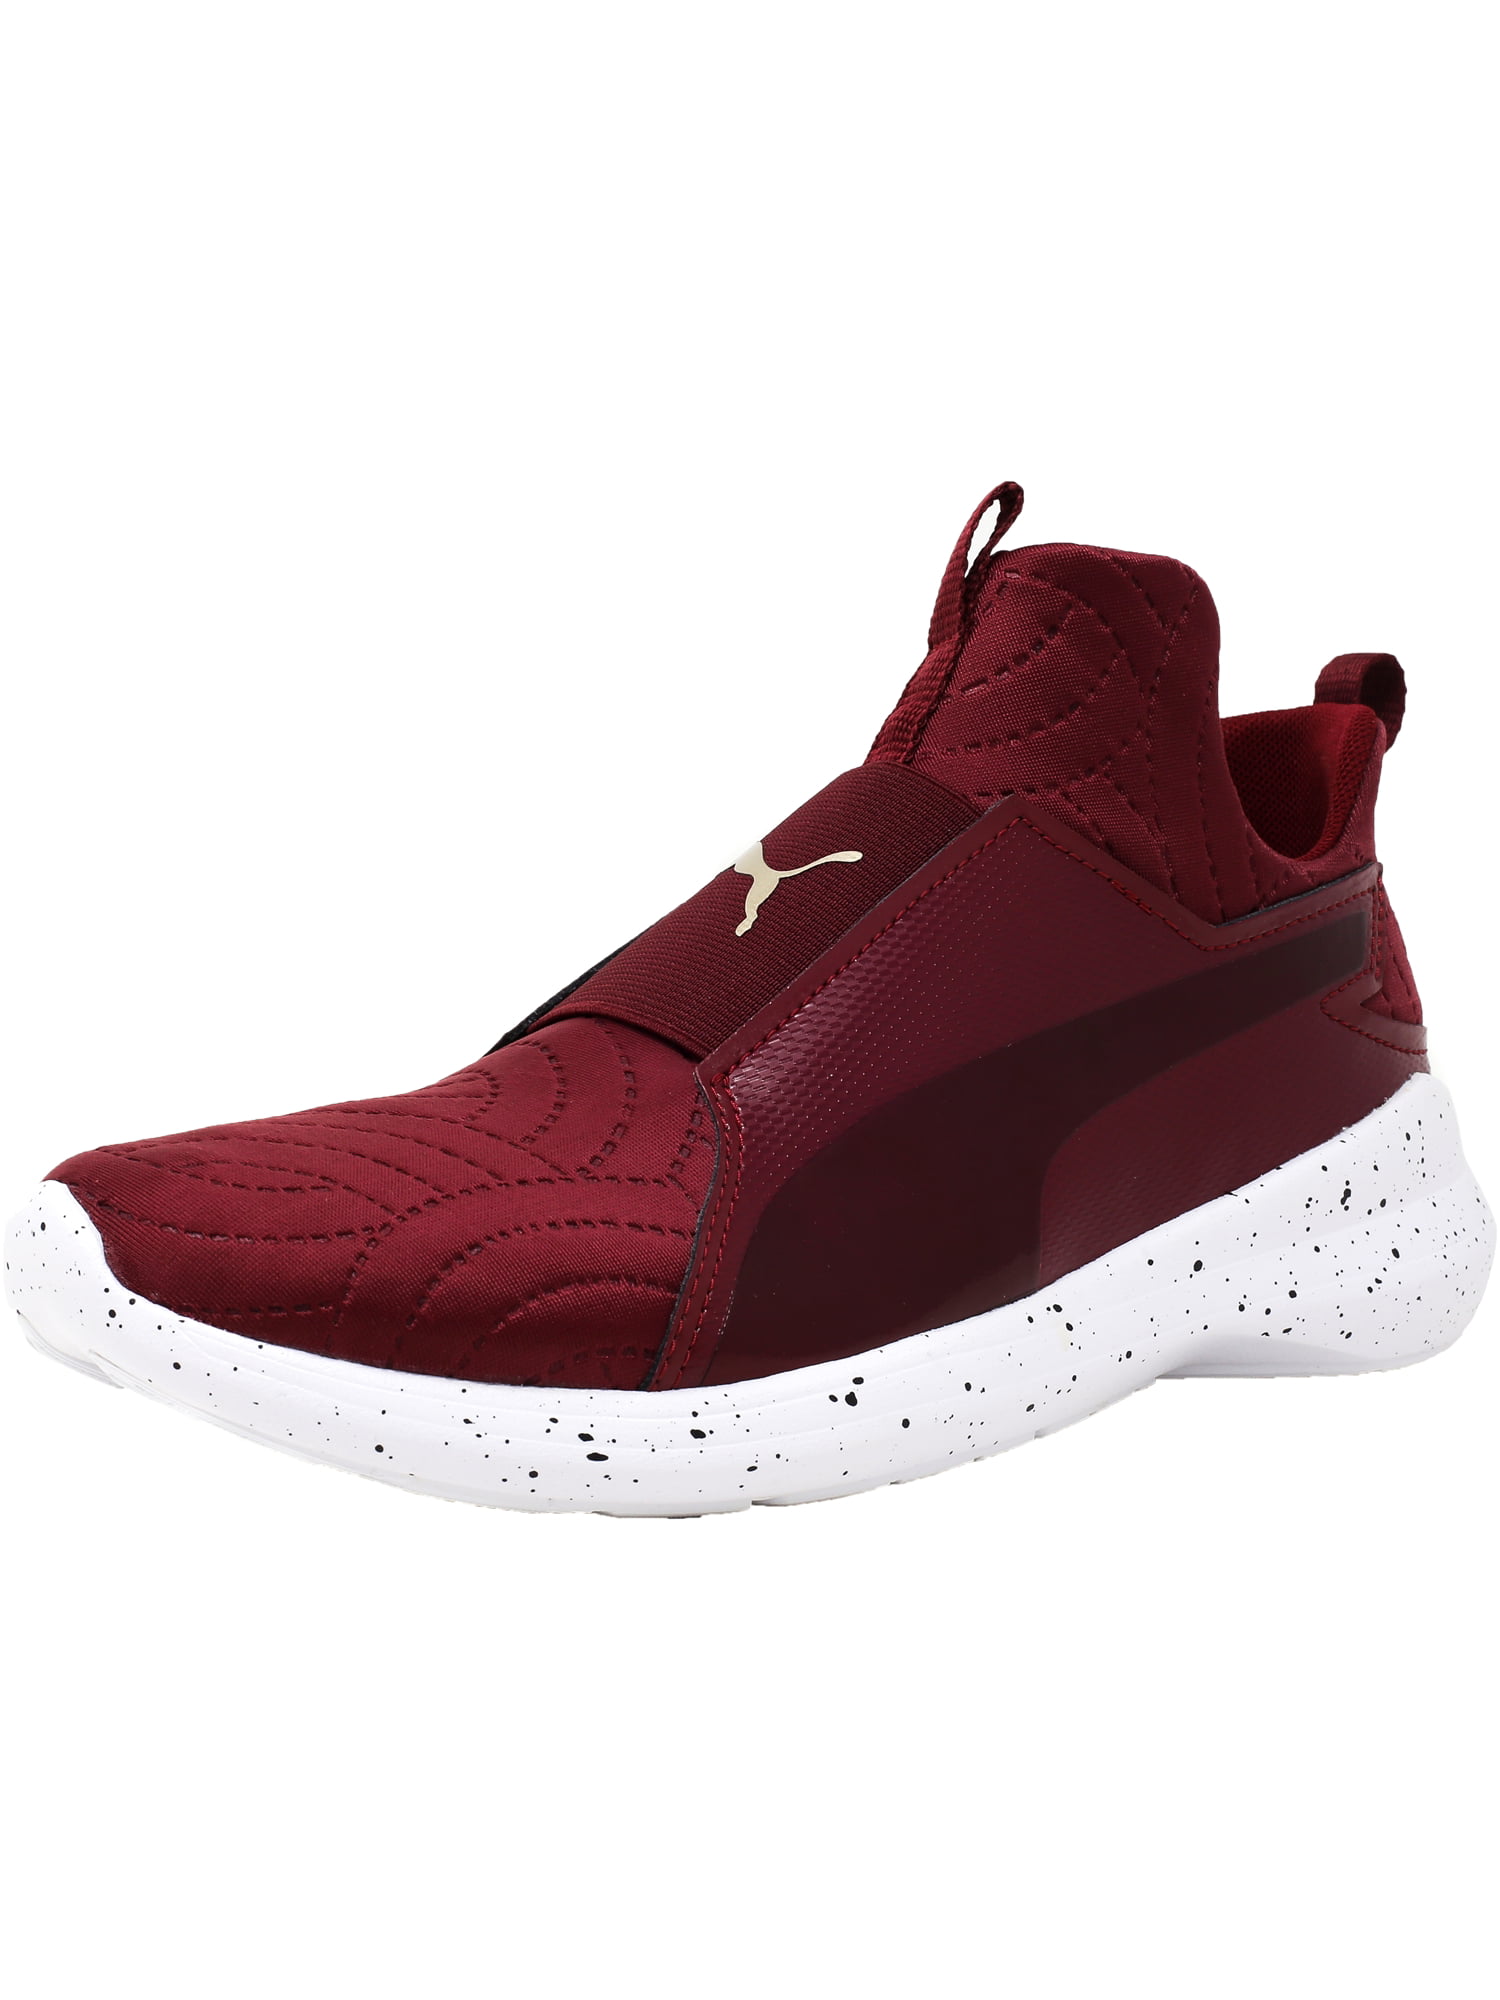 puma high ankle shoes for women Limit 